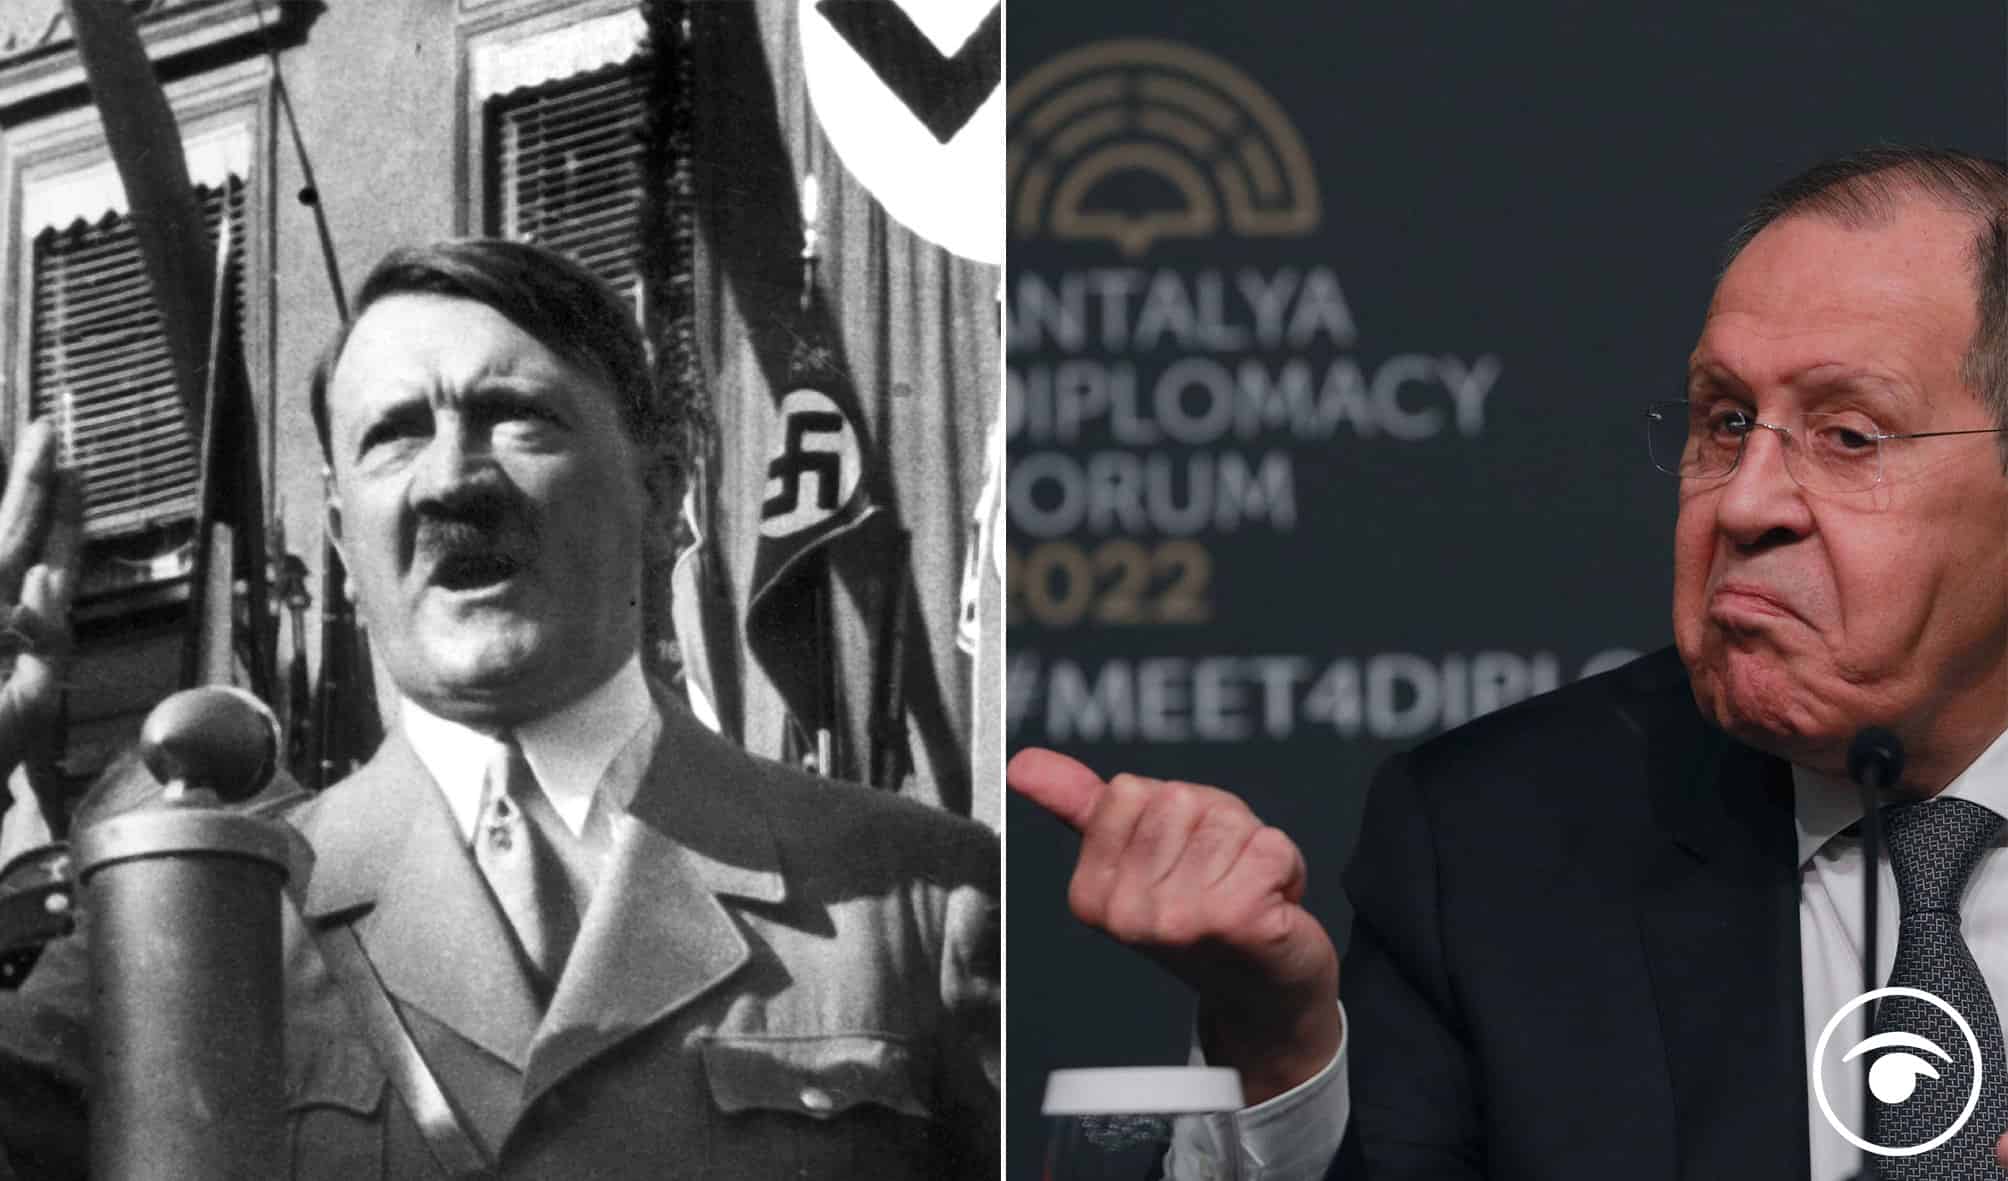 ‘Delusional, dangerous;’ Outrage over Lavrov’s Nazism comments including claim Hitler was part Jewish